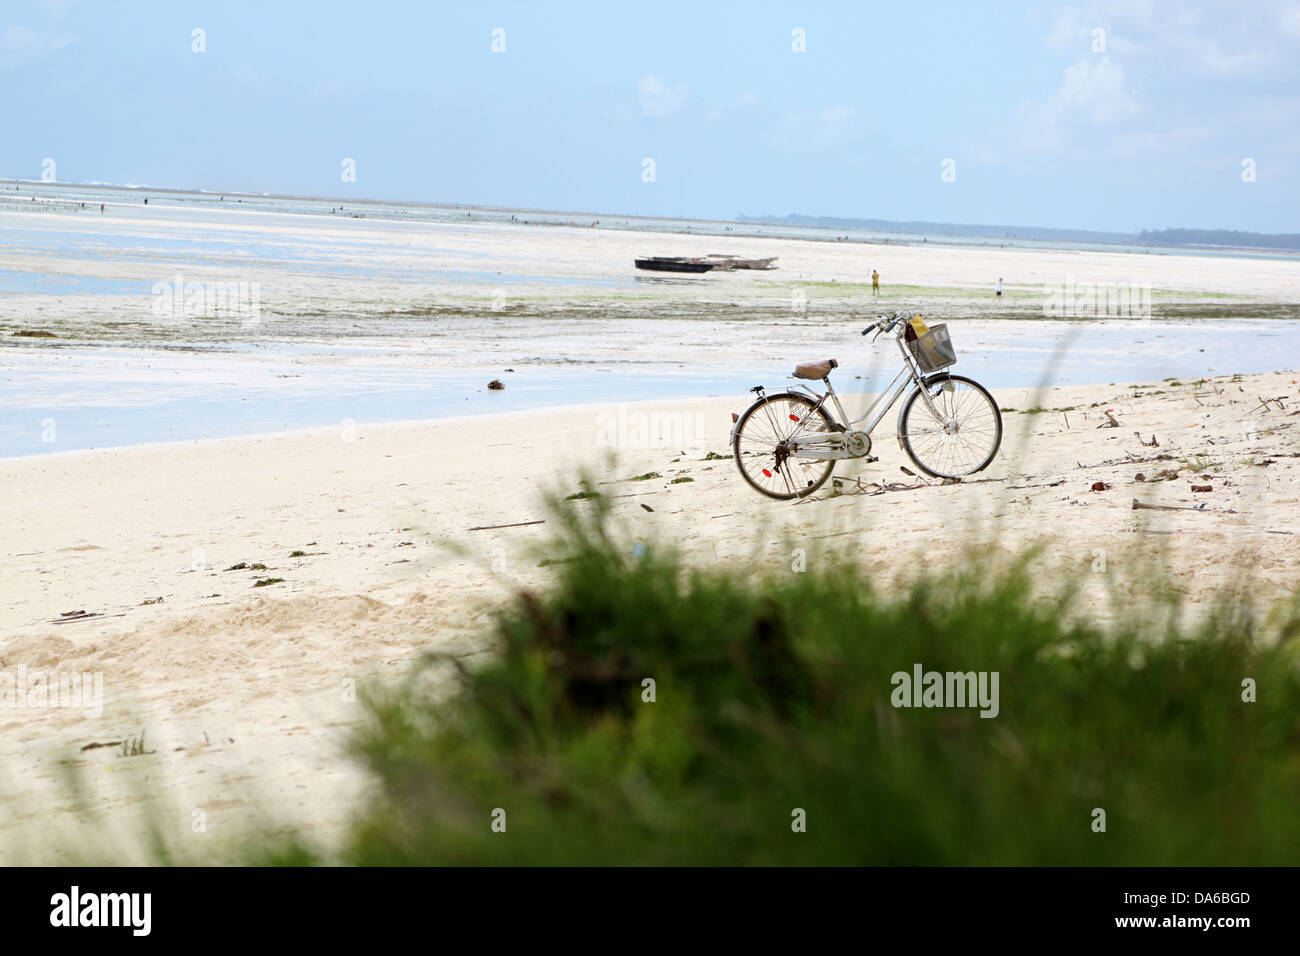 An abandoned bicycle parked on a white sandy beach paradise in Zanzibar with blue waters Stock Photo